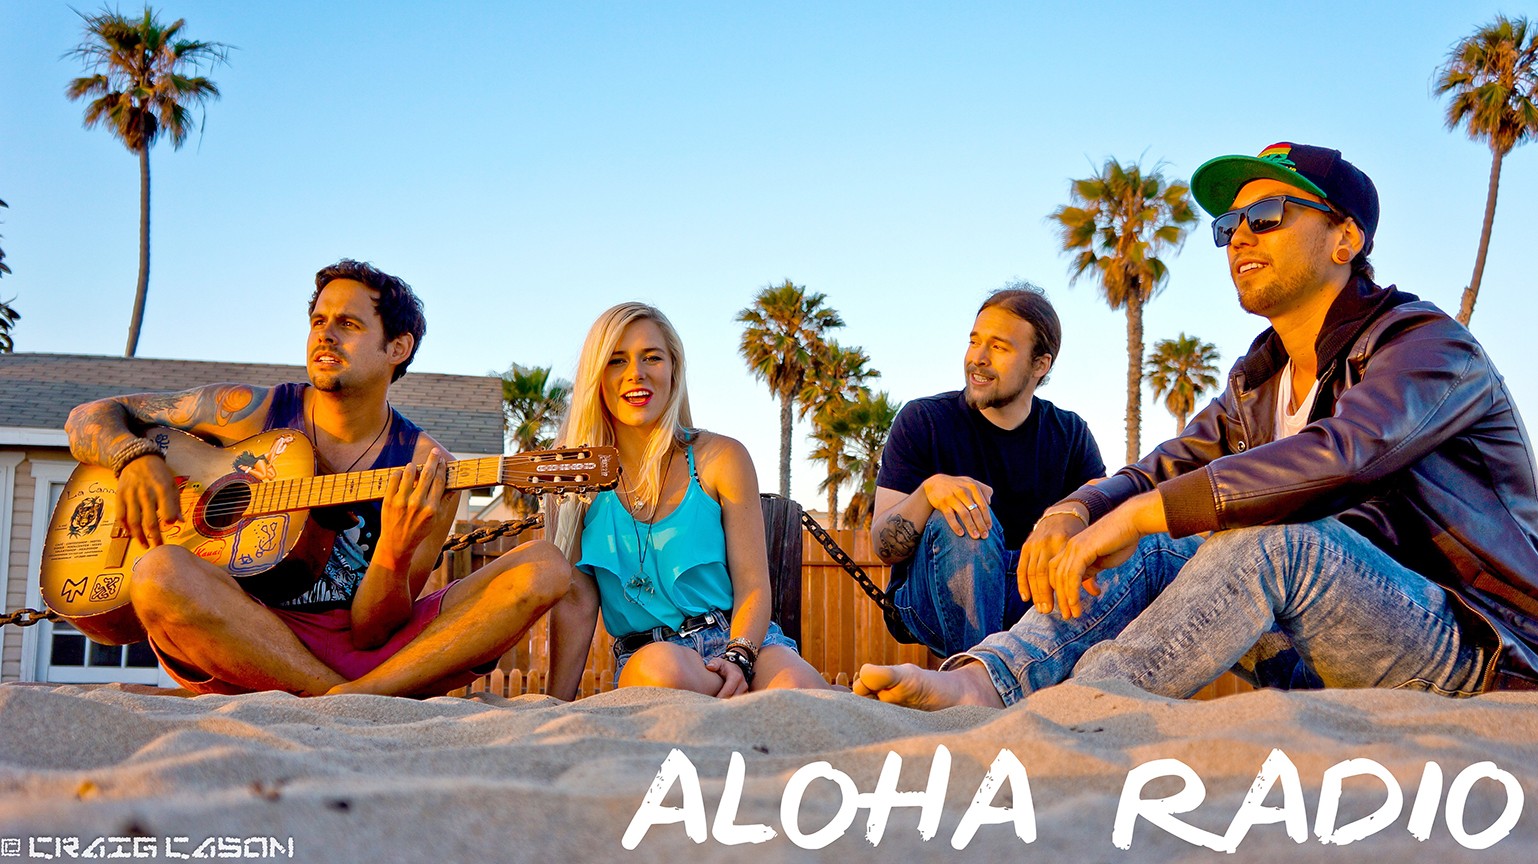 Catch the last wave of summer with Aloha Radio.